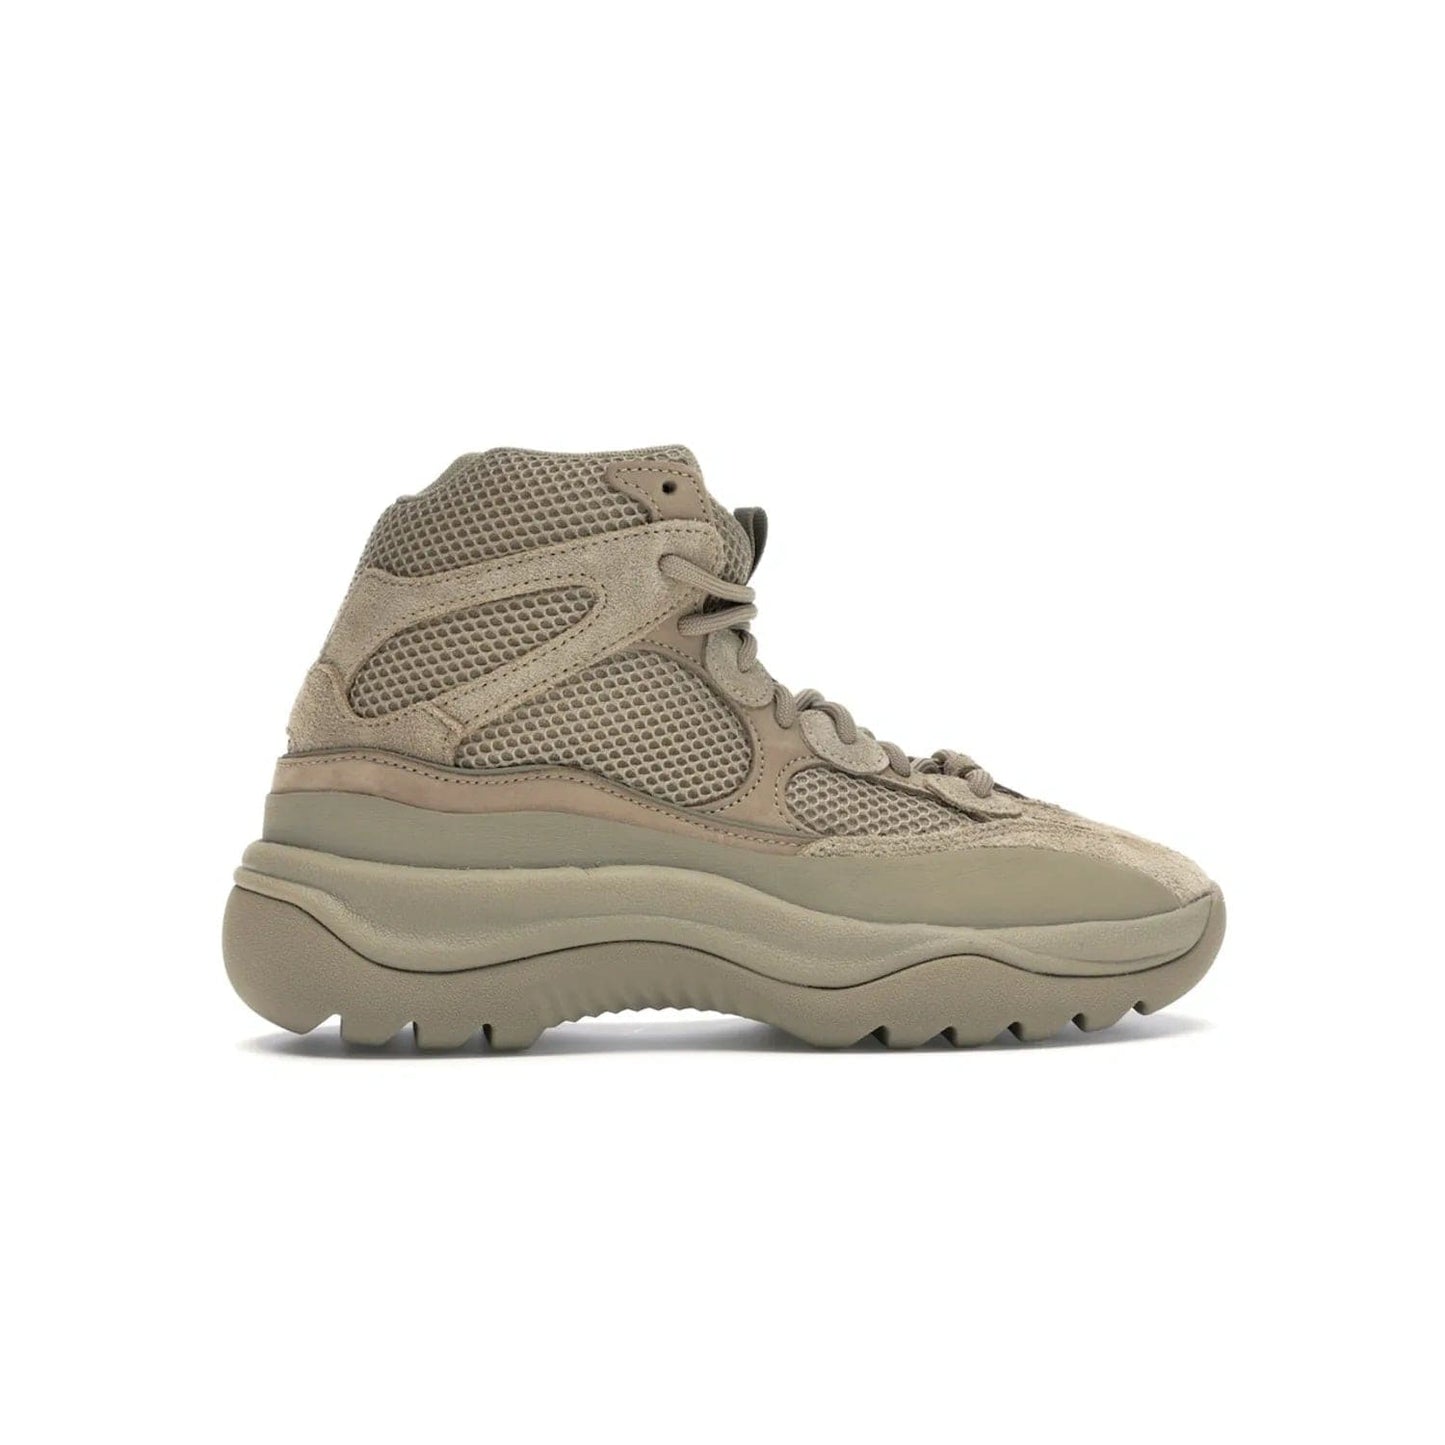 adidas Yeezy Desert Boot Rock - Image 36 - Only at www.BallersClubKickz.com - #
This season, make a fashion statement with the adidas Yeezy Desert Boot Rock. Nubuck and suede upper offers tonal style while the grooved sole provides traction and stability. Get yours in April 2019.